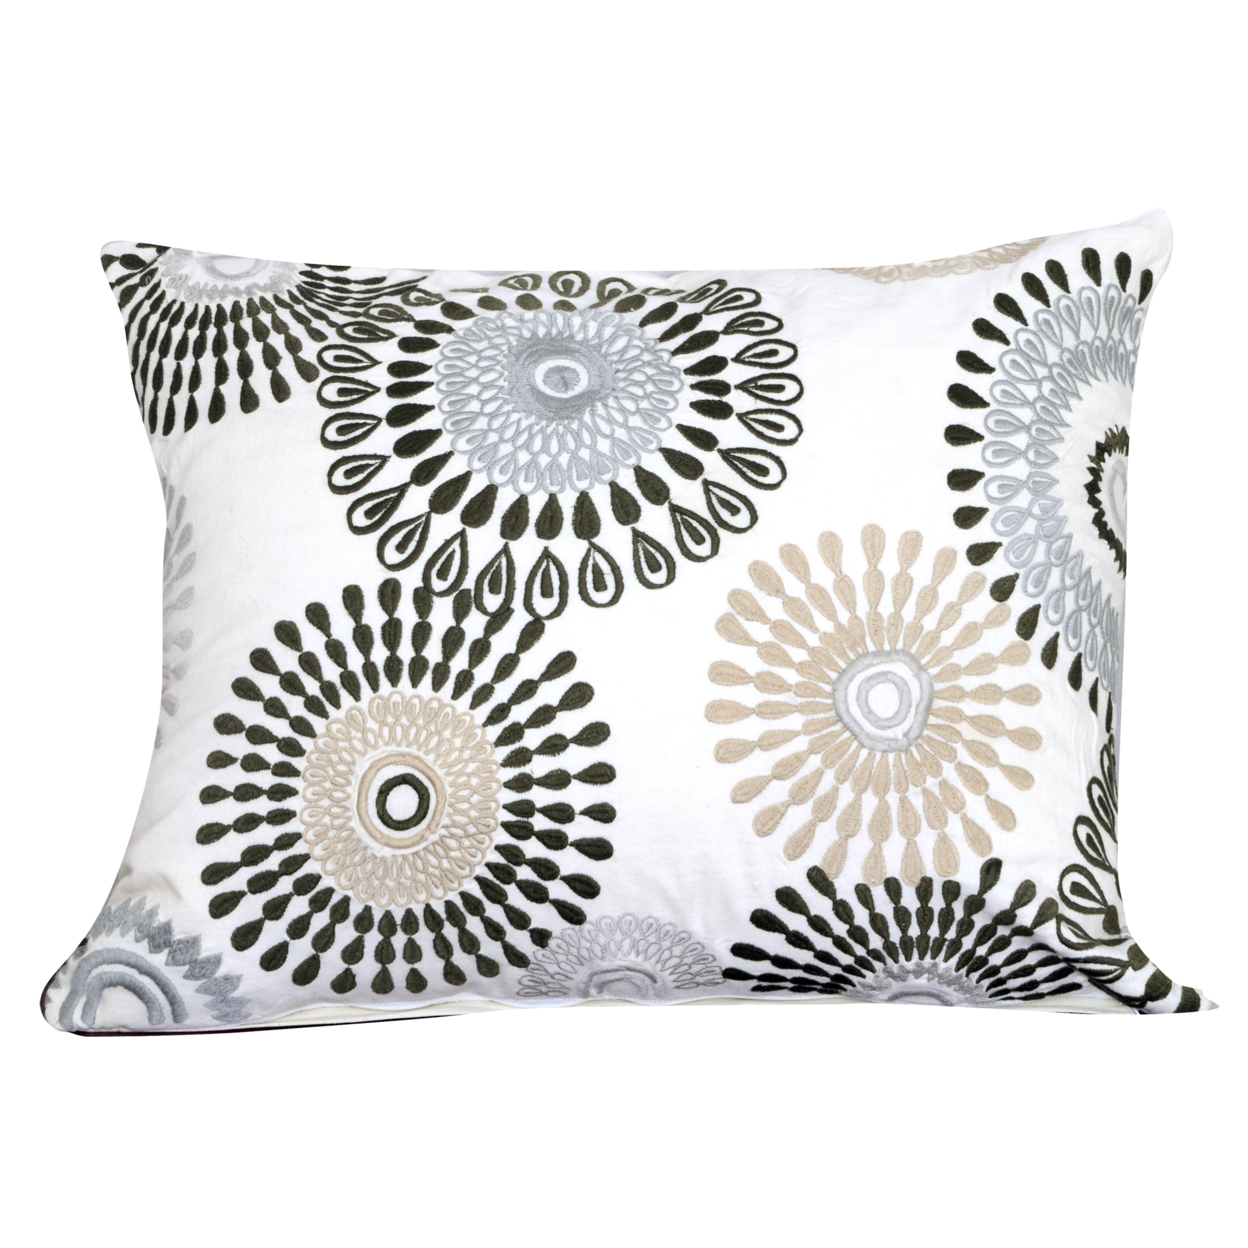 20 X 16 Inch Cotton Pillow With Floral Embroidery, Set Of 2, White And Gray- Saltoro Sherpi